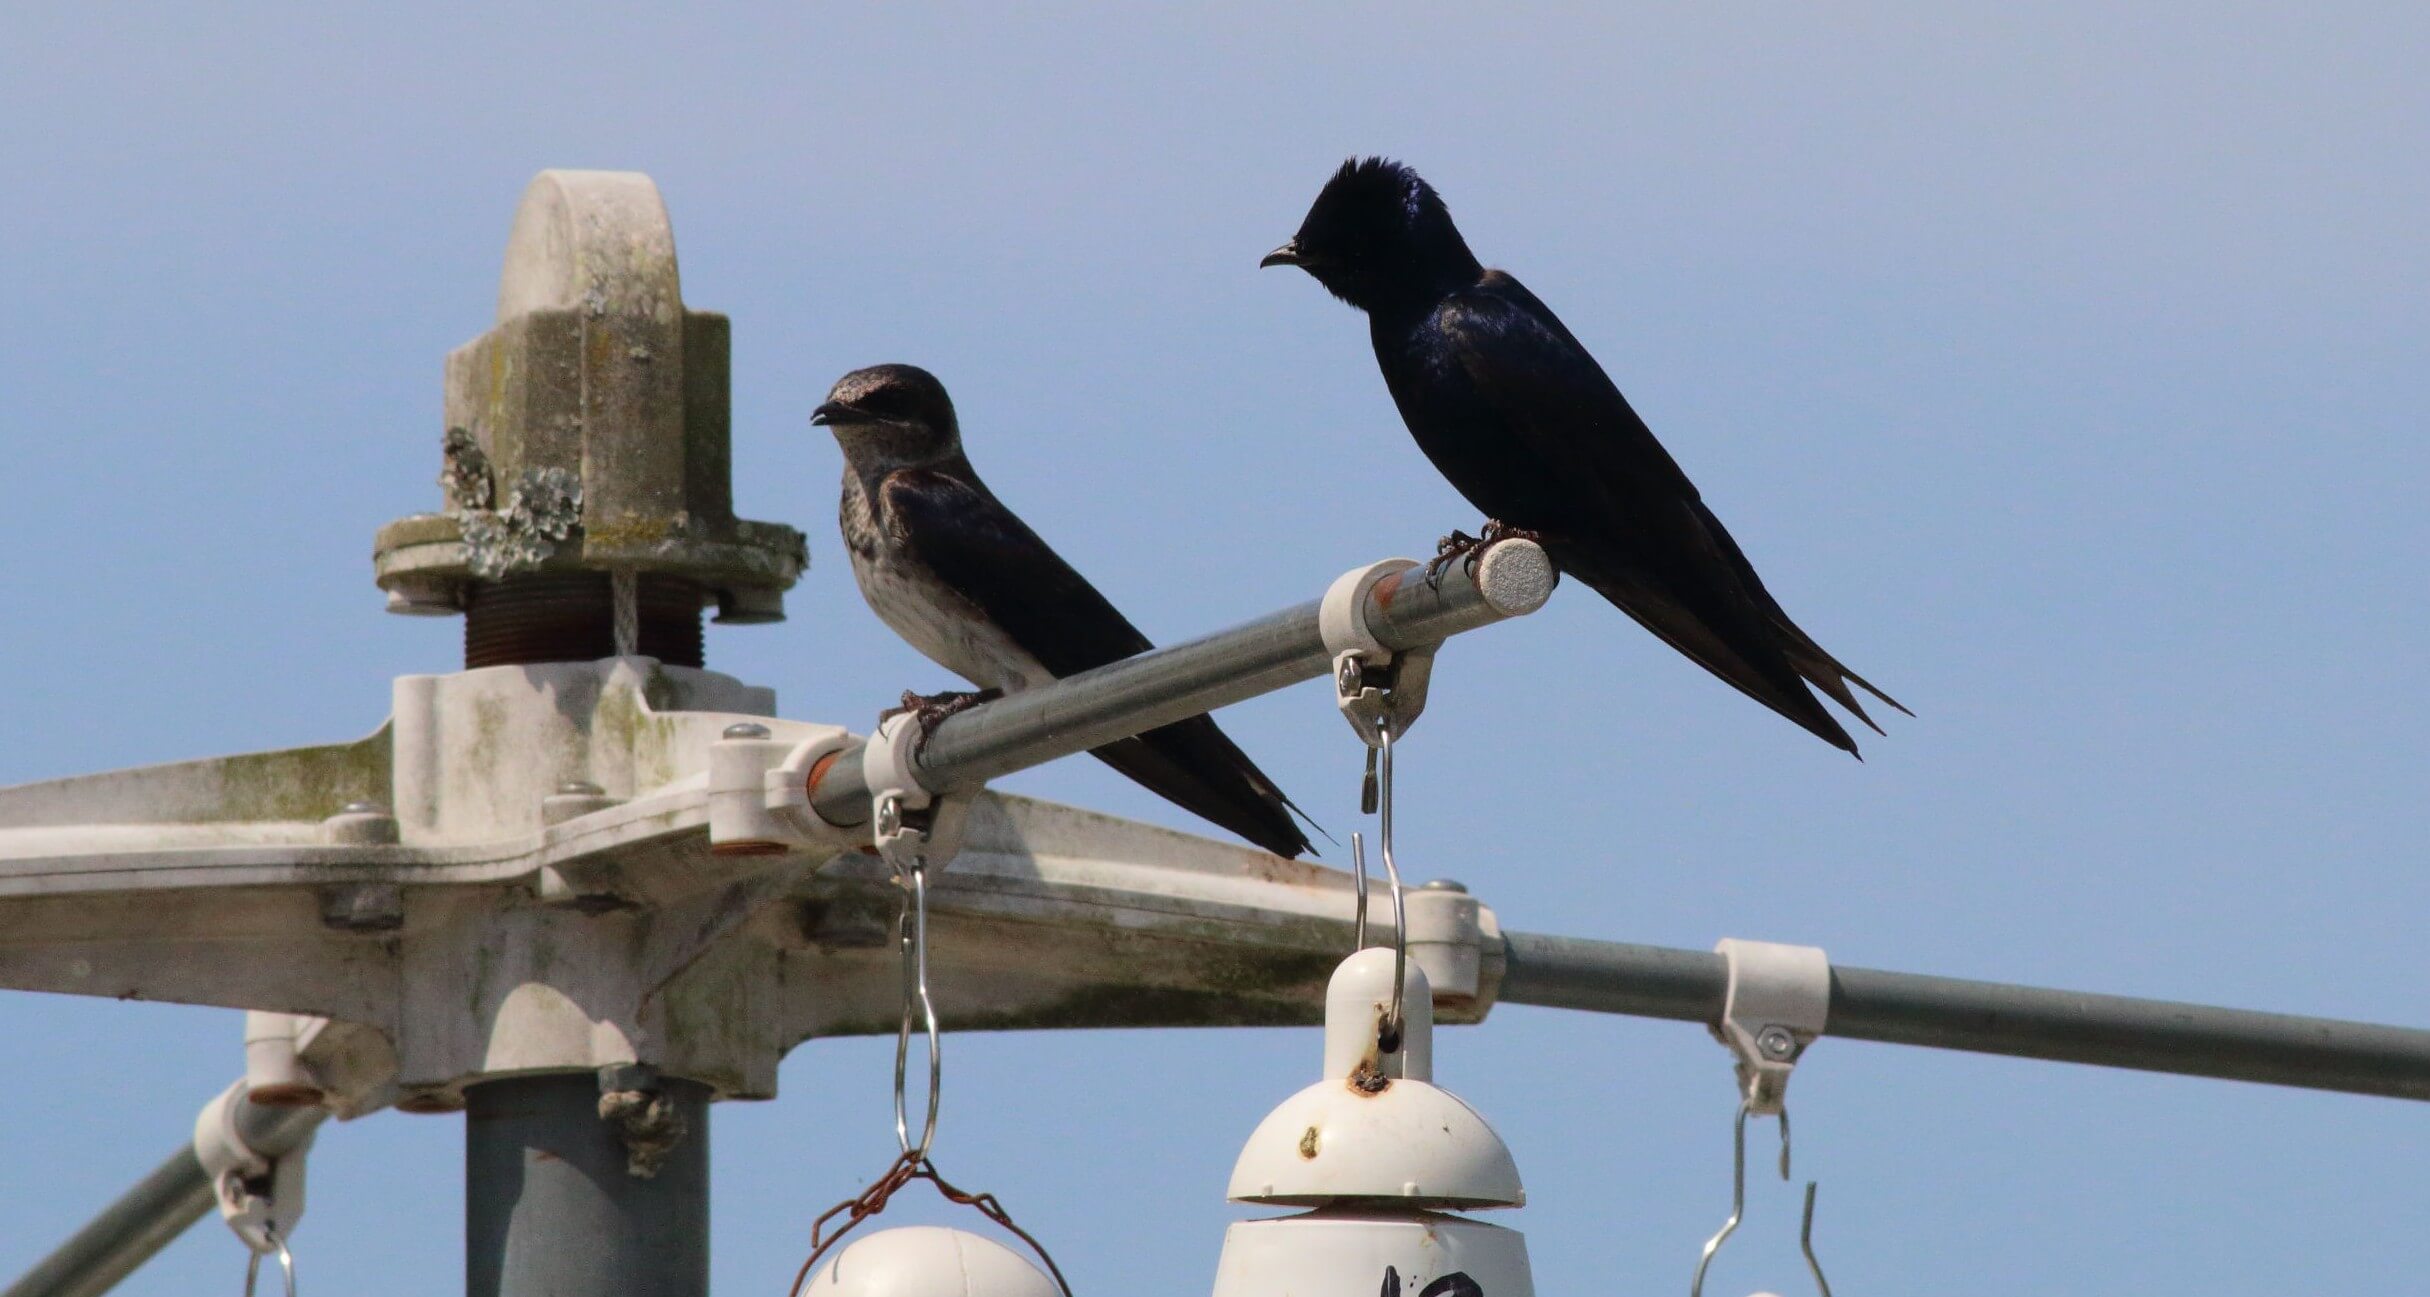 These Purple Martins were among the many birds I saw at Land Between the Lakes National Recreational Area in Kentucky. Photo by Bruce Beehler